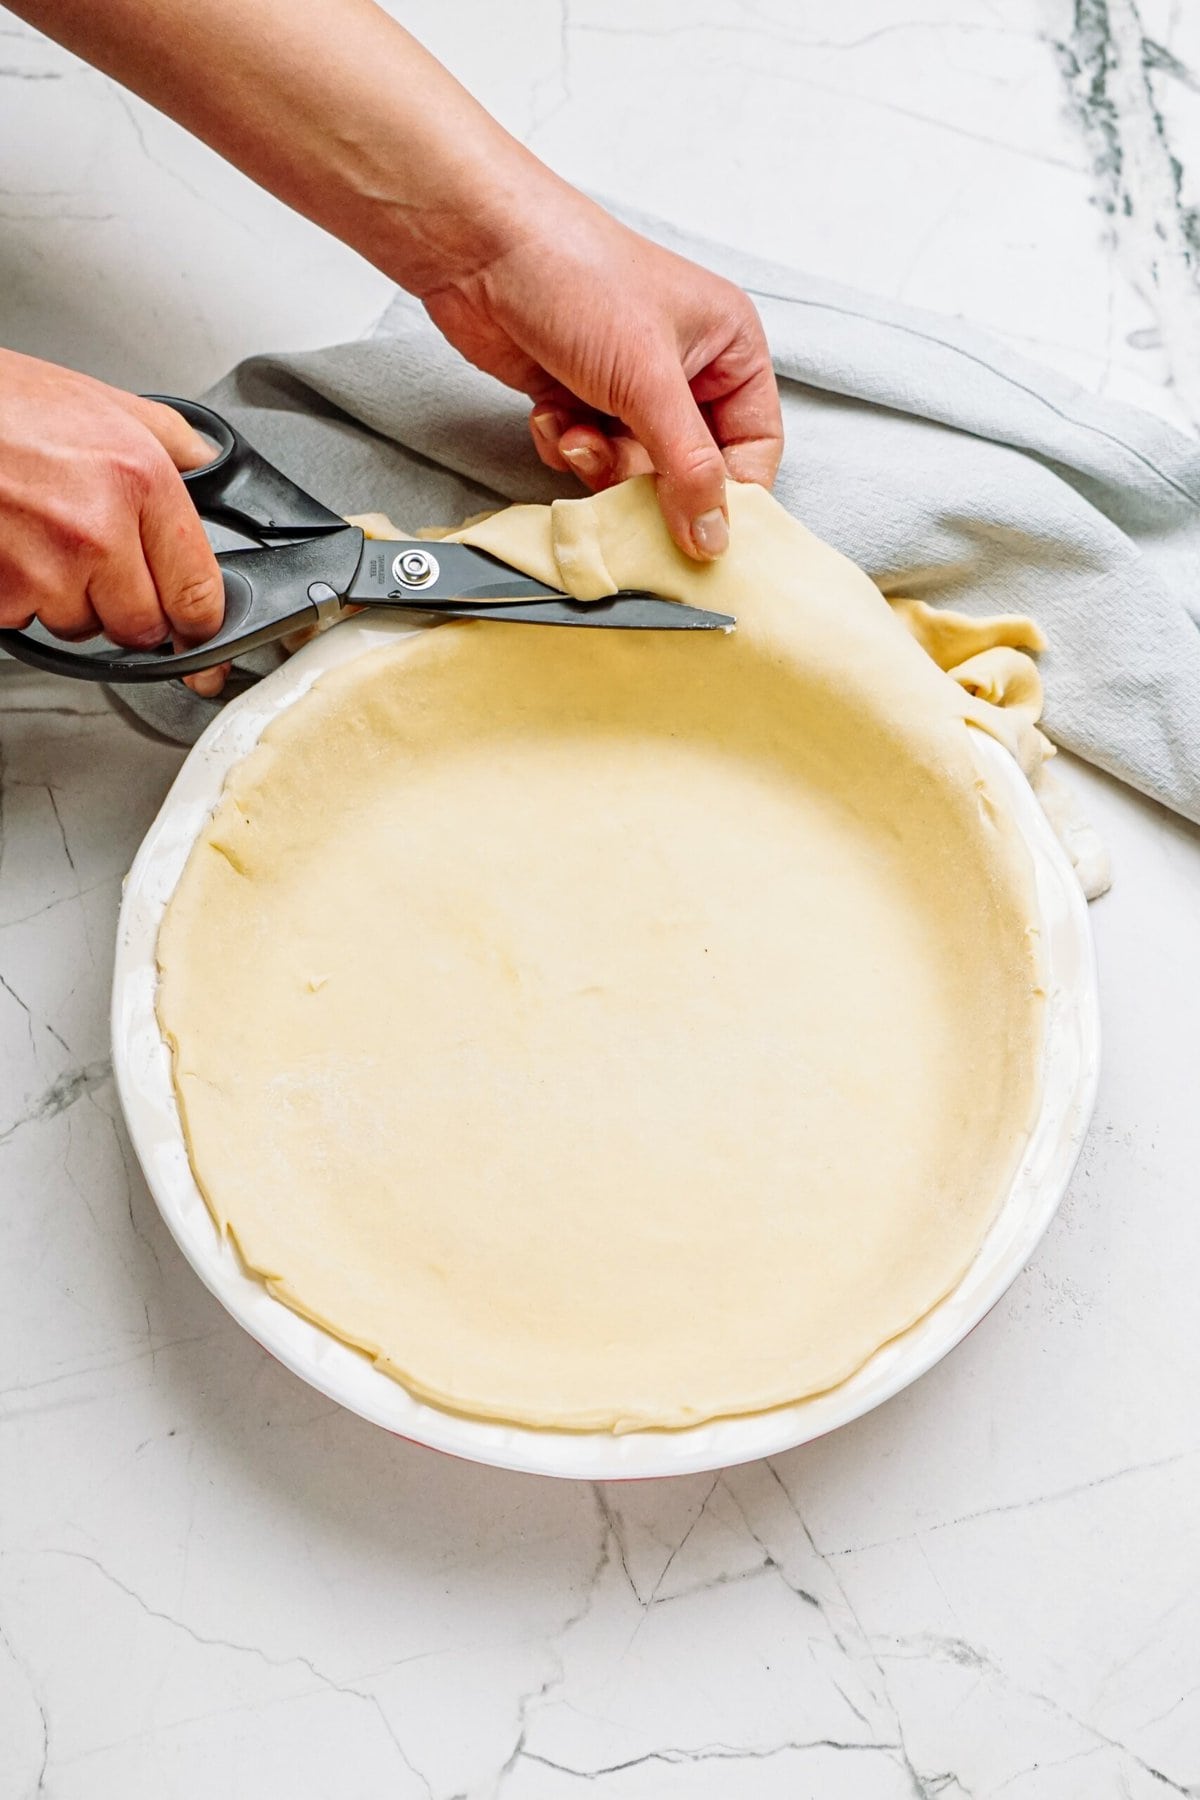 cutting off excess dough with kitchen sheers